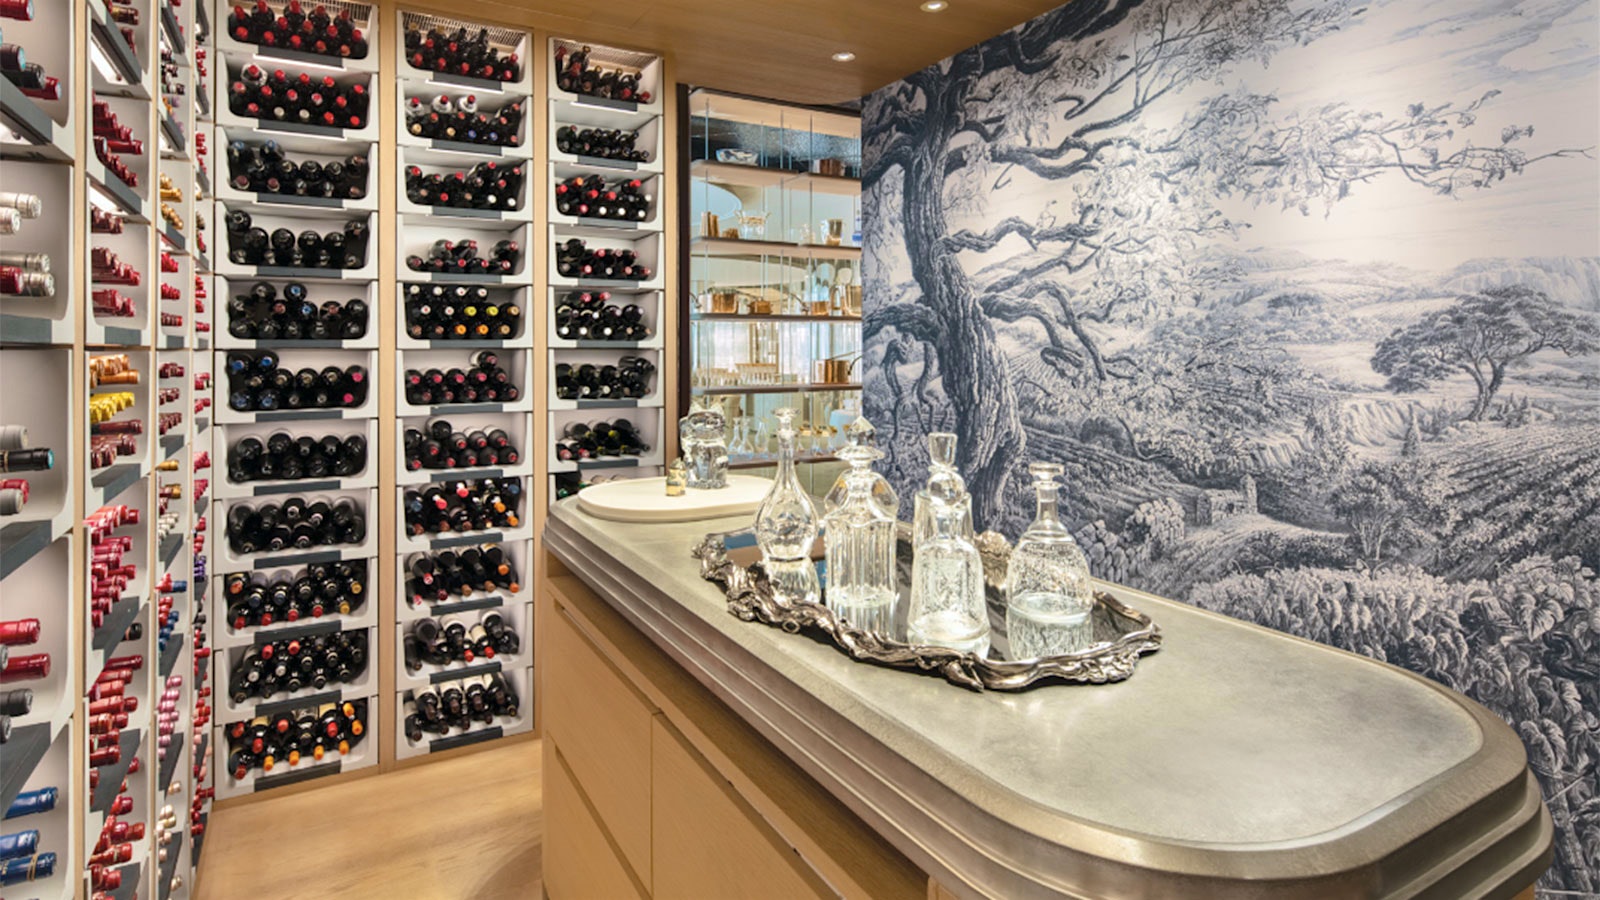  A wall of wine bottles facing a wall covered with an artwork, with a tasting table in the center of the room, at Alain Ducasse at Morpheus restaurant